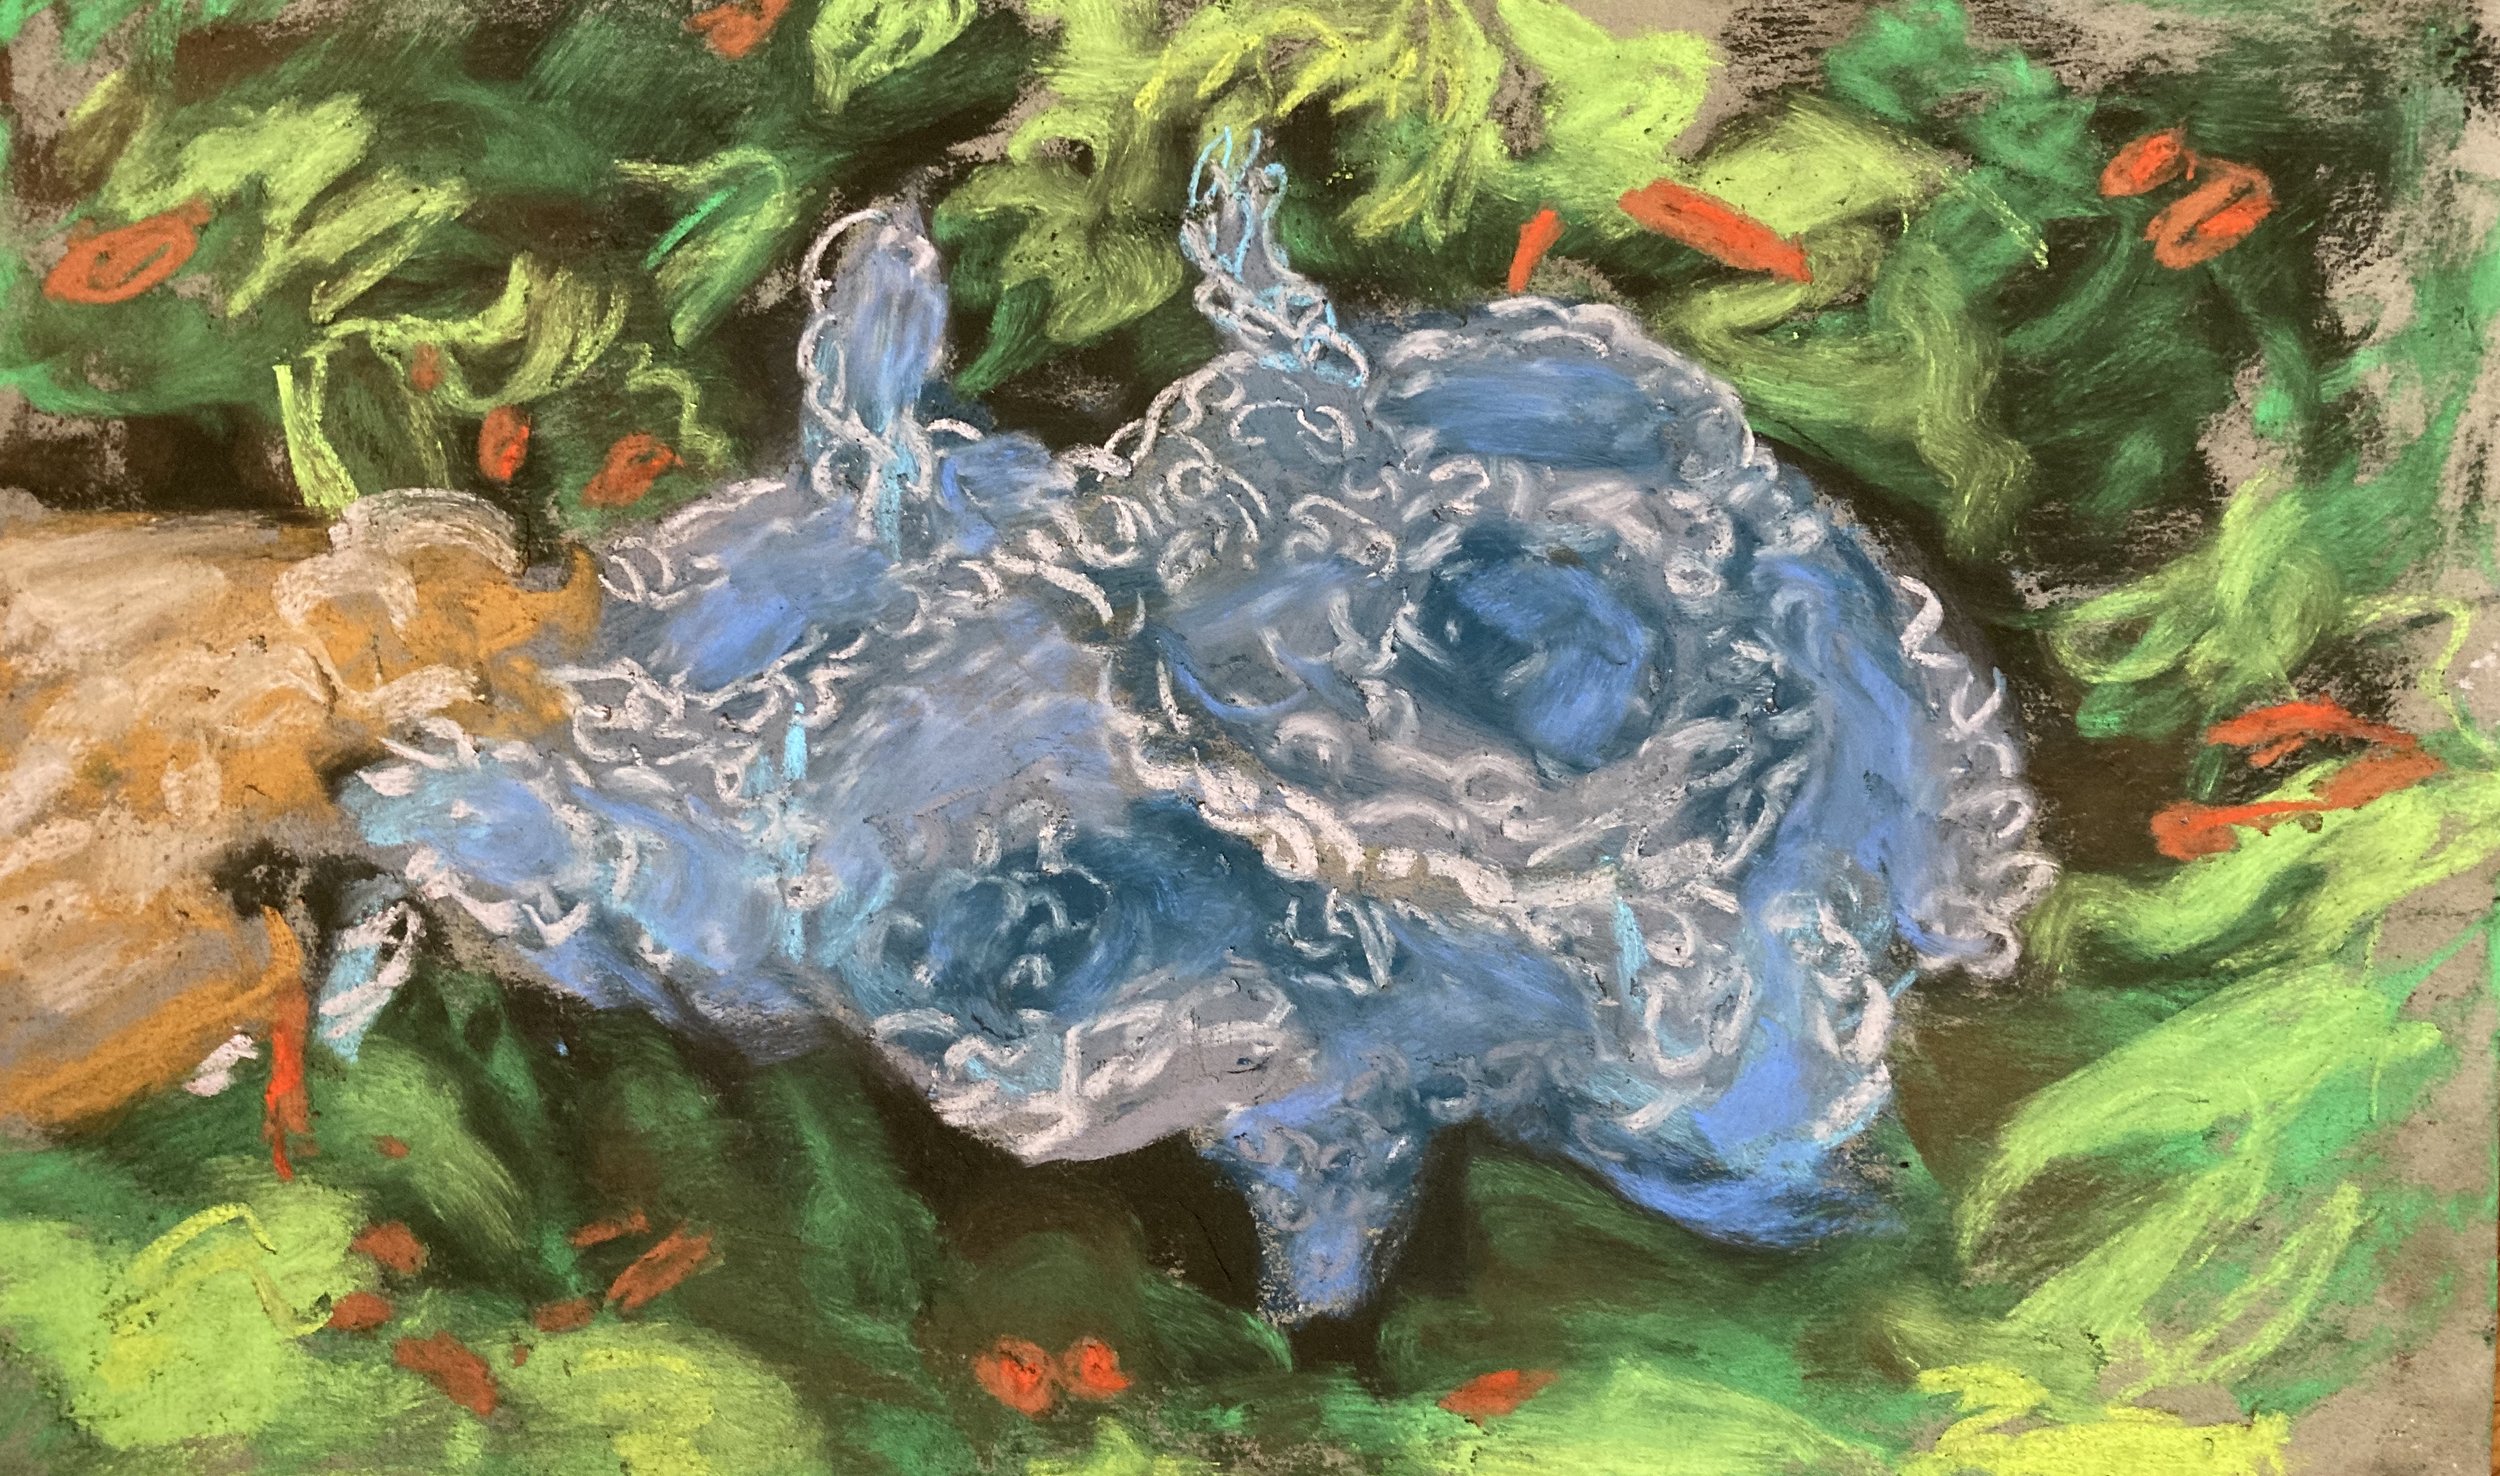 Microbacteria 4 (2022) Pastel on Paper 12"x7"